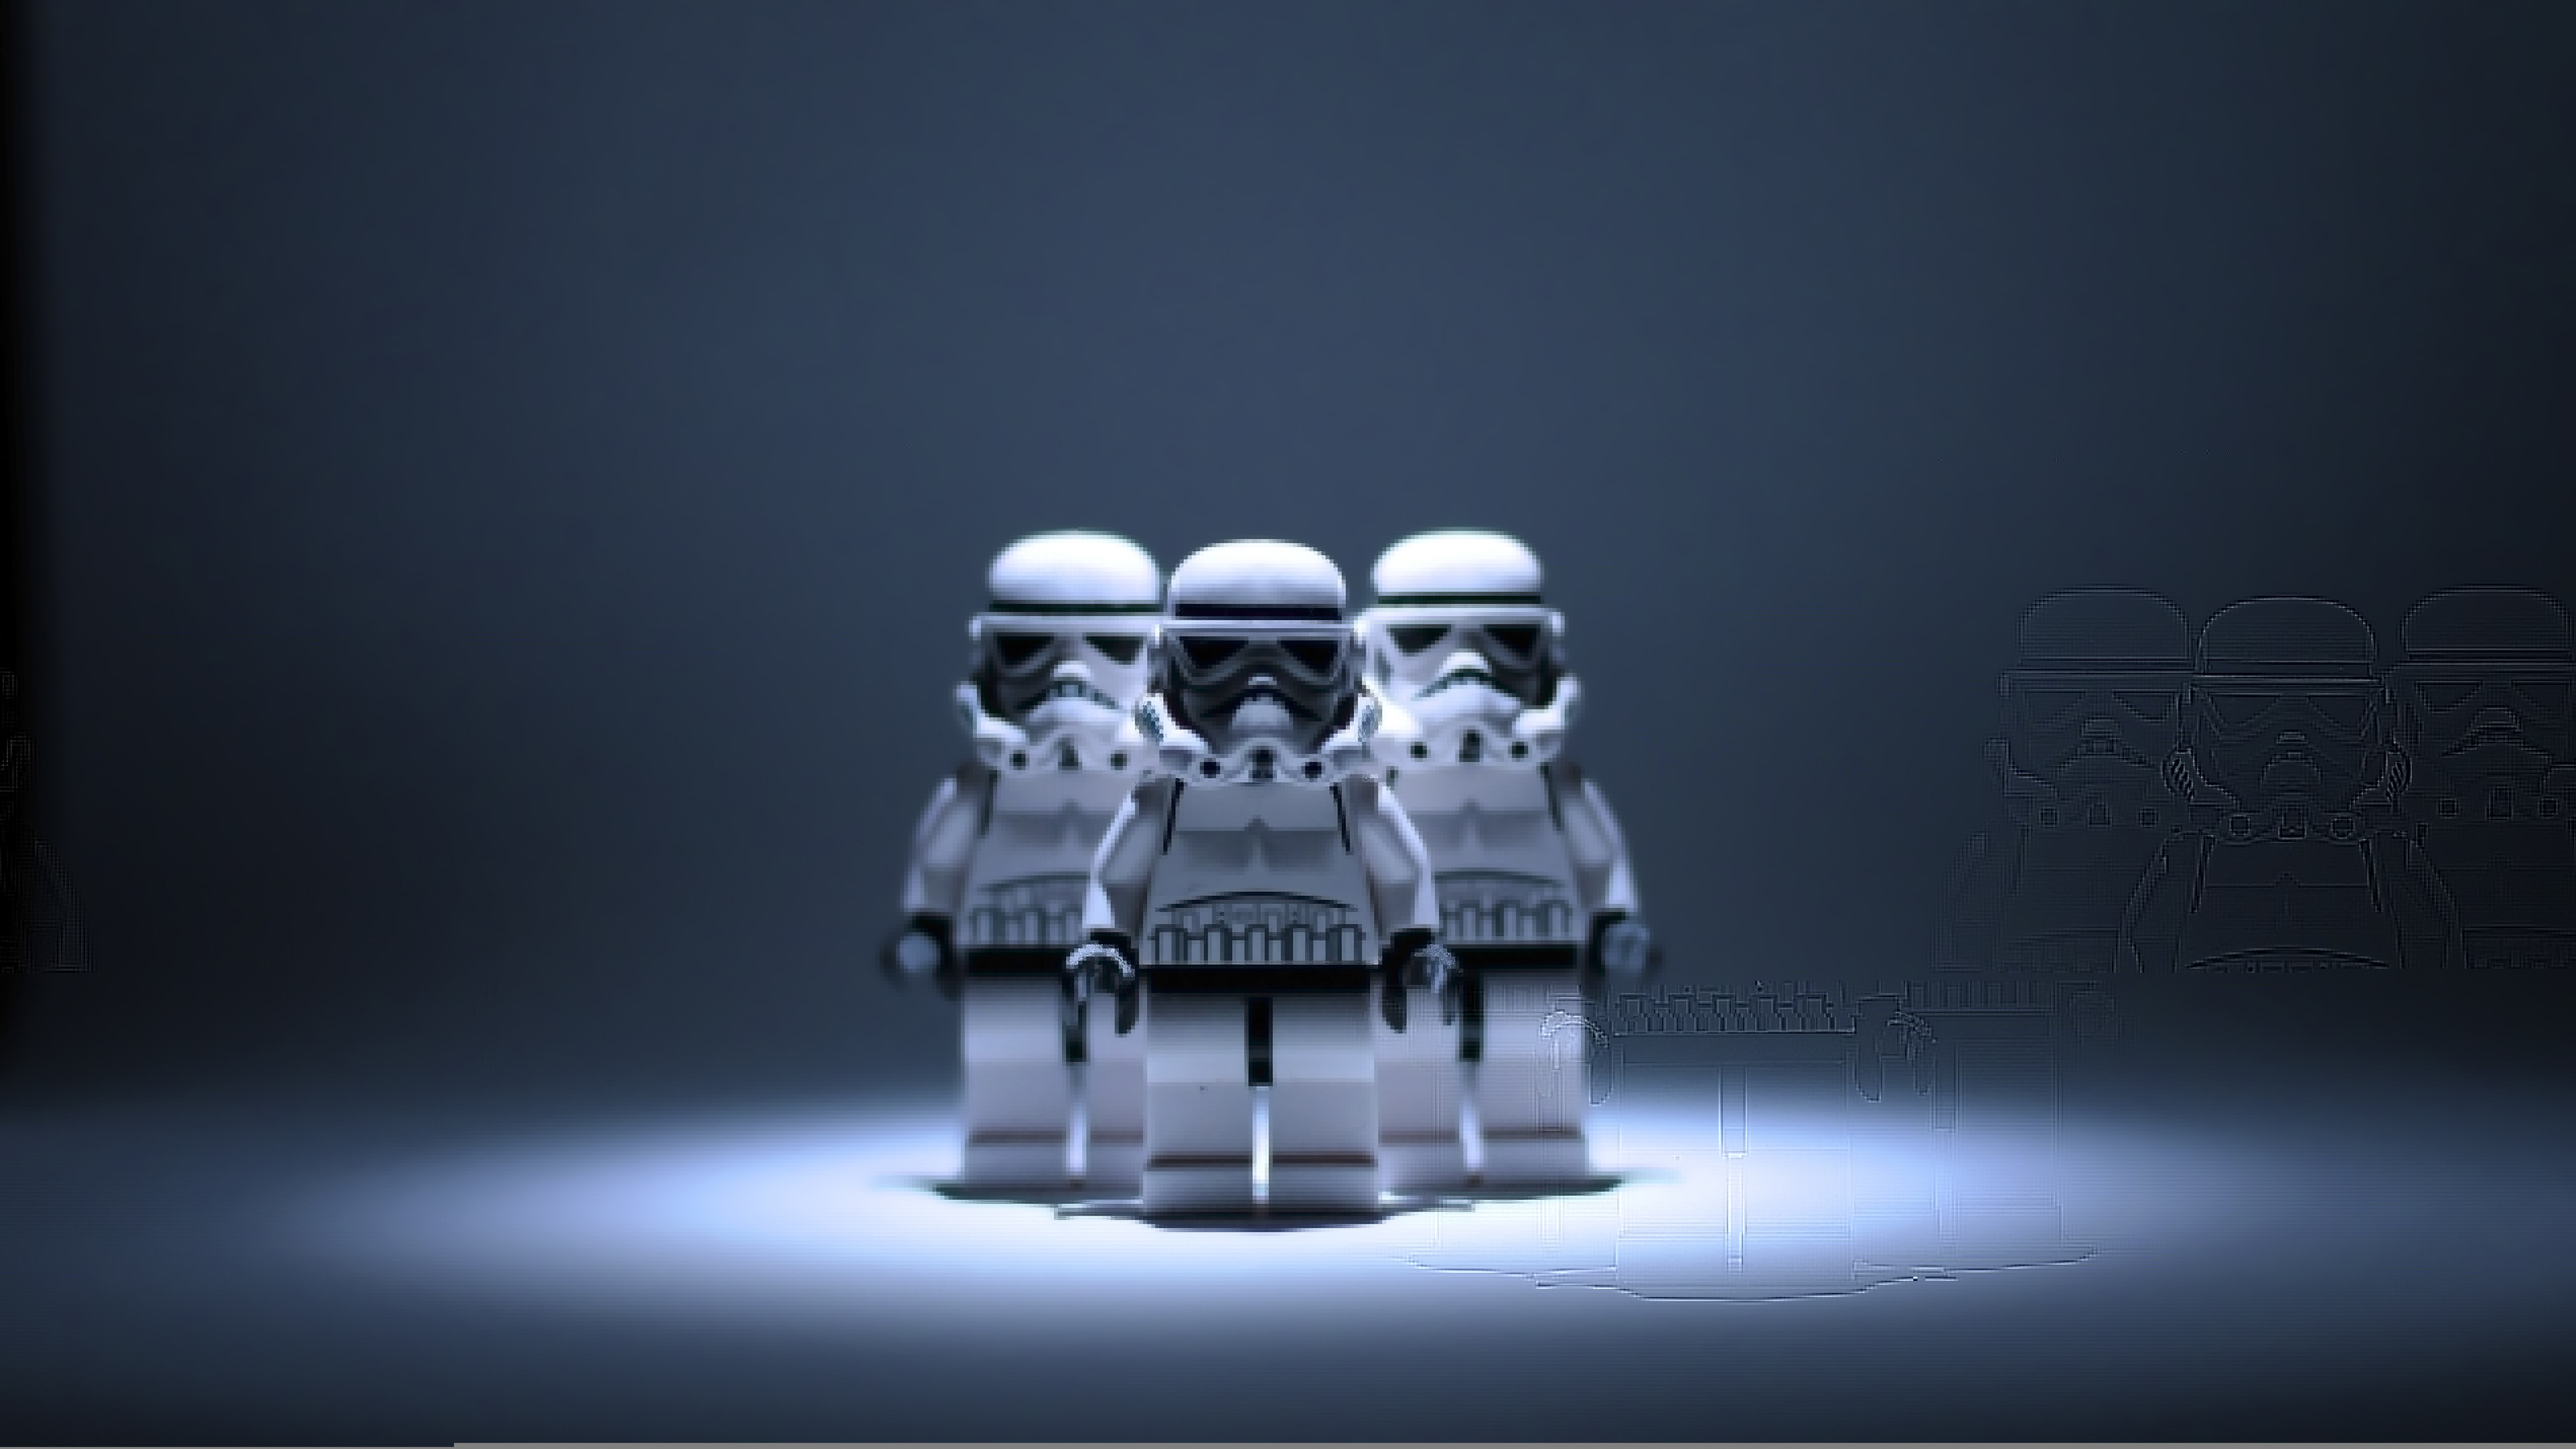 Lego Toys Stormtroopers Star Wars Wallpaper Photos Pictures